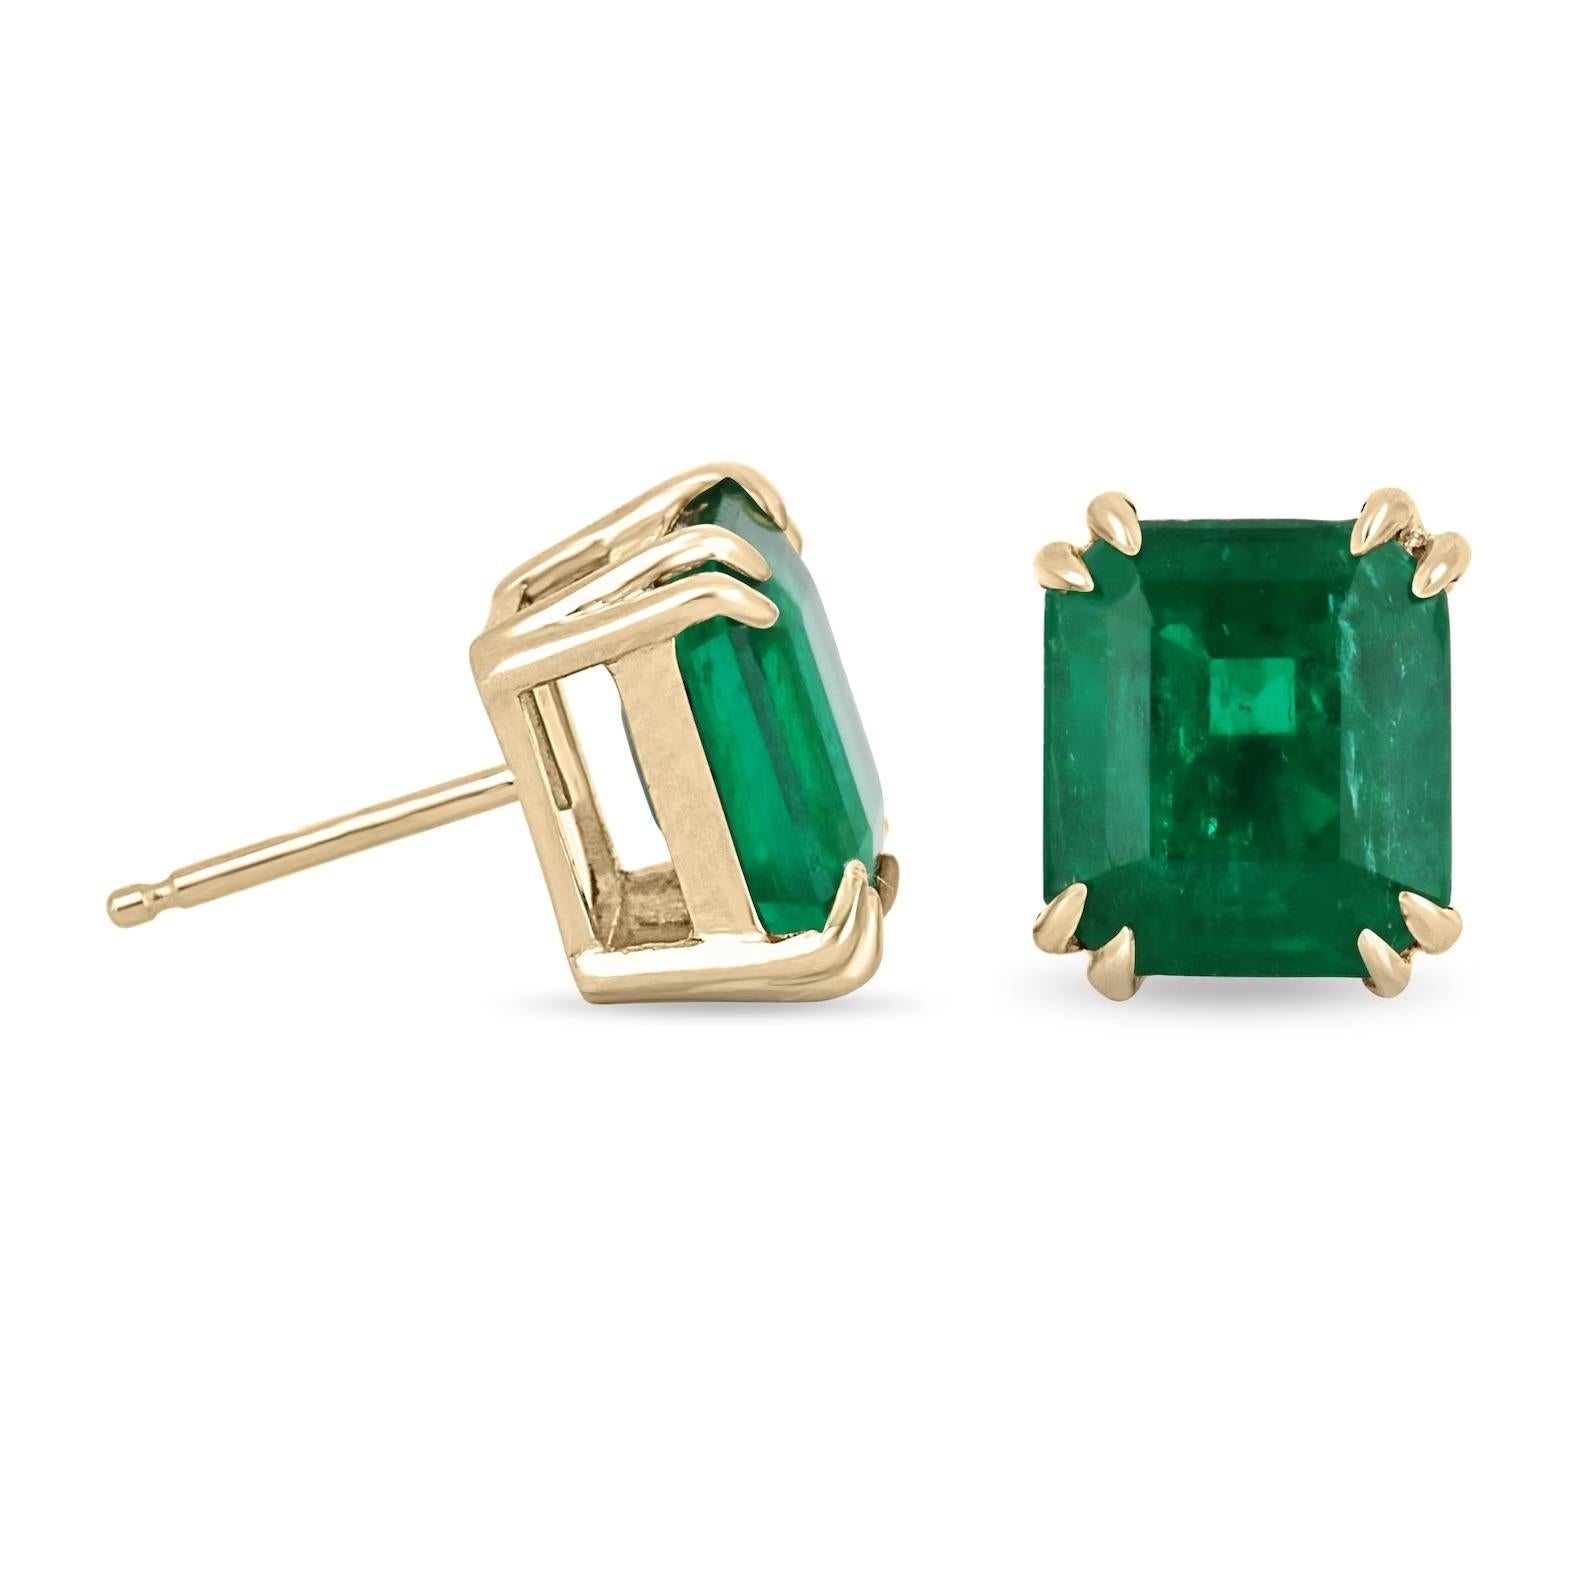 A remarkable, and extraordinary pair of fine-quality TOP-OF-THE-LINE AAA+ emerald earrings. This gorgeous set carries 6.31-carats, of two stunning emerald cut emeralds. The gemstones display, a rich and vivid, dark green color with a desirable